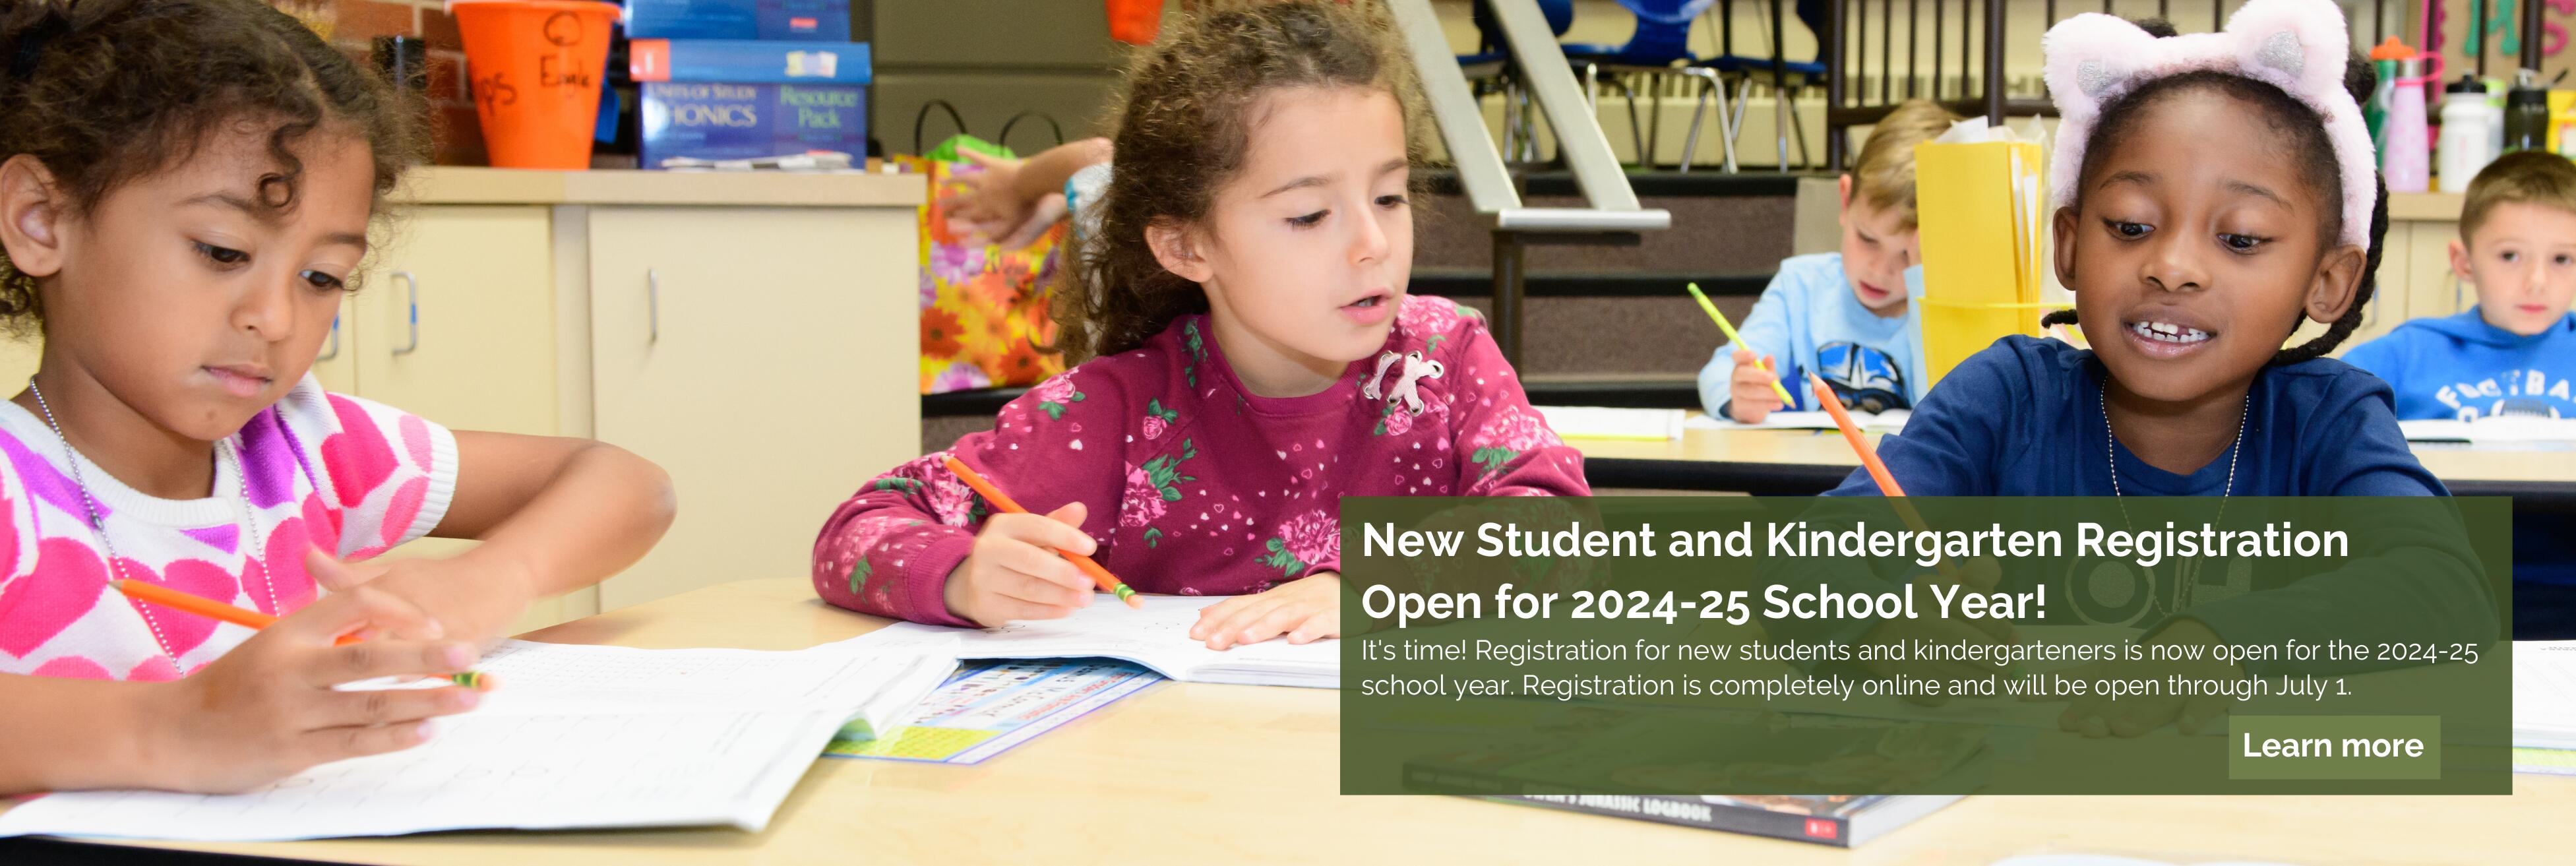 Registration now open for all students for the 2023-24 school year